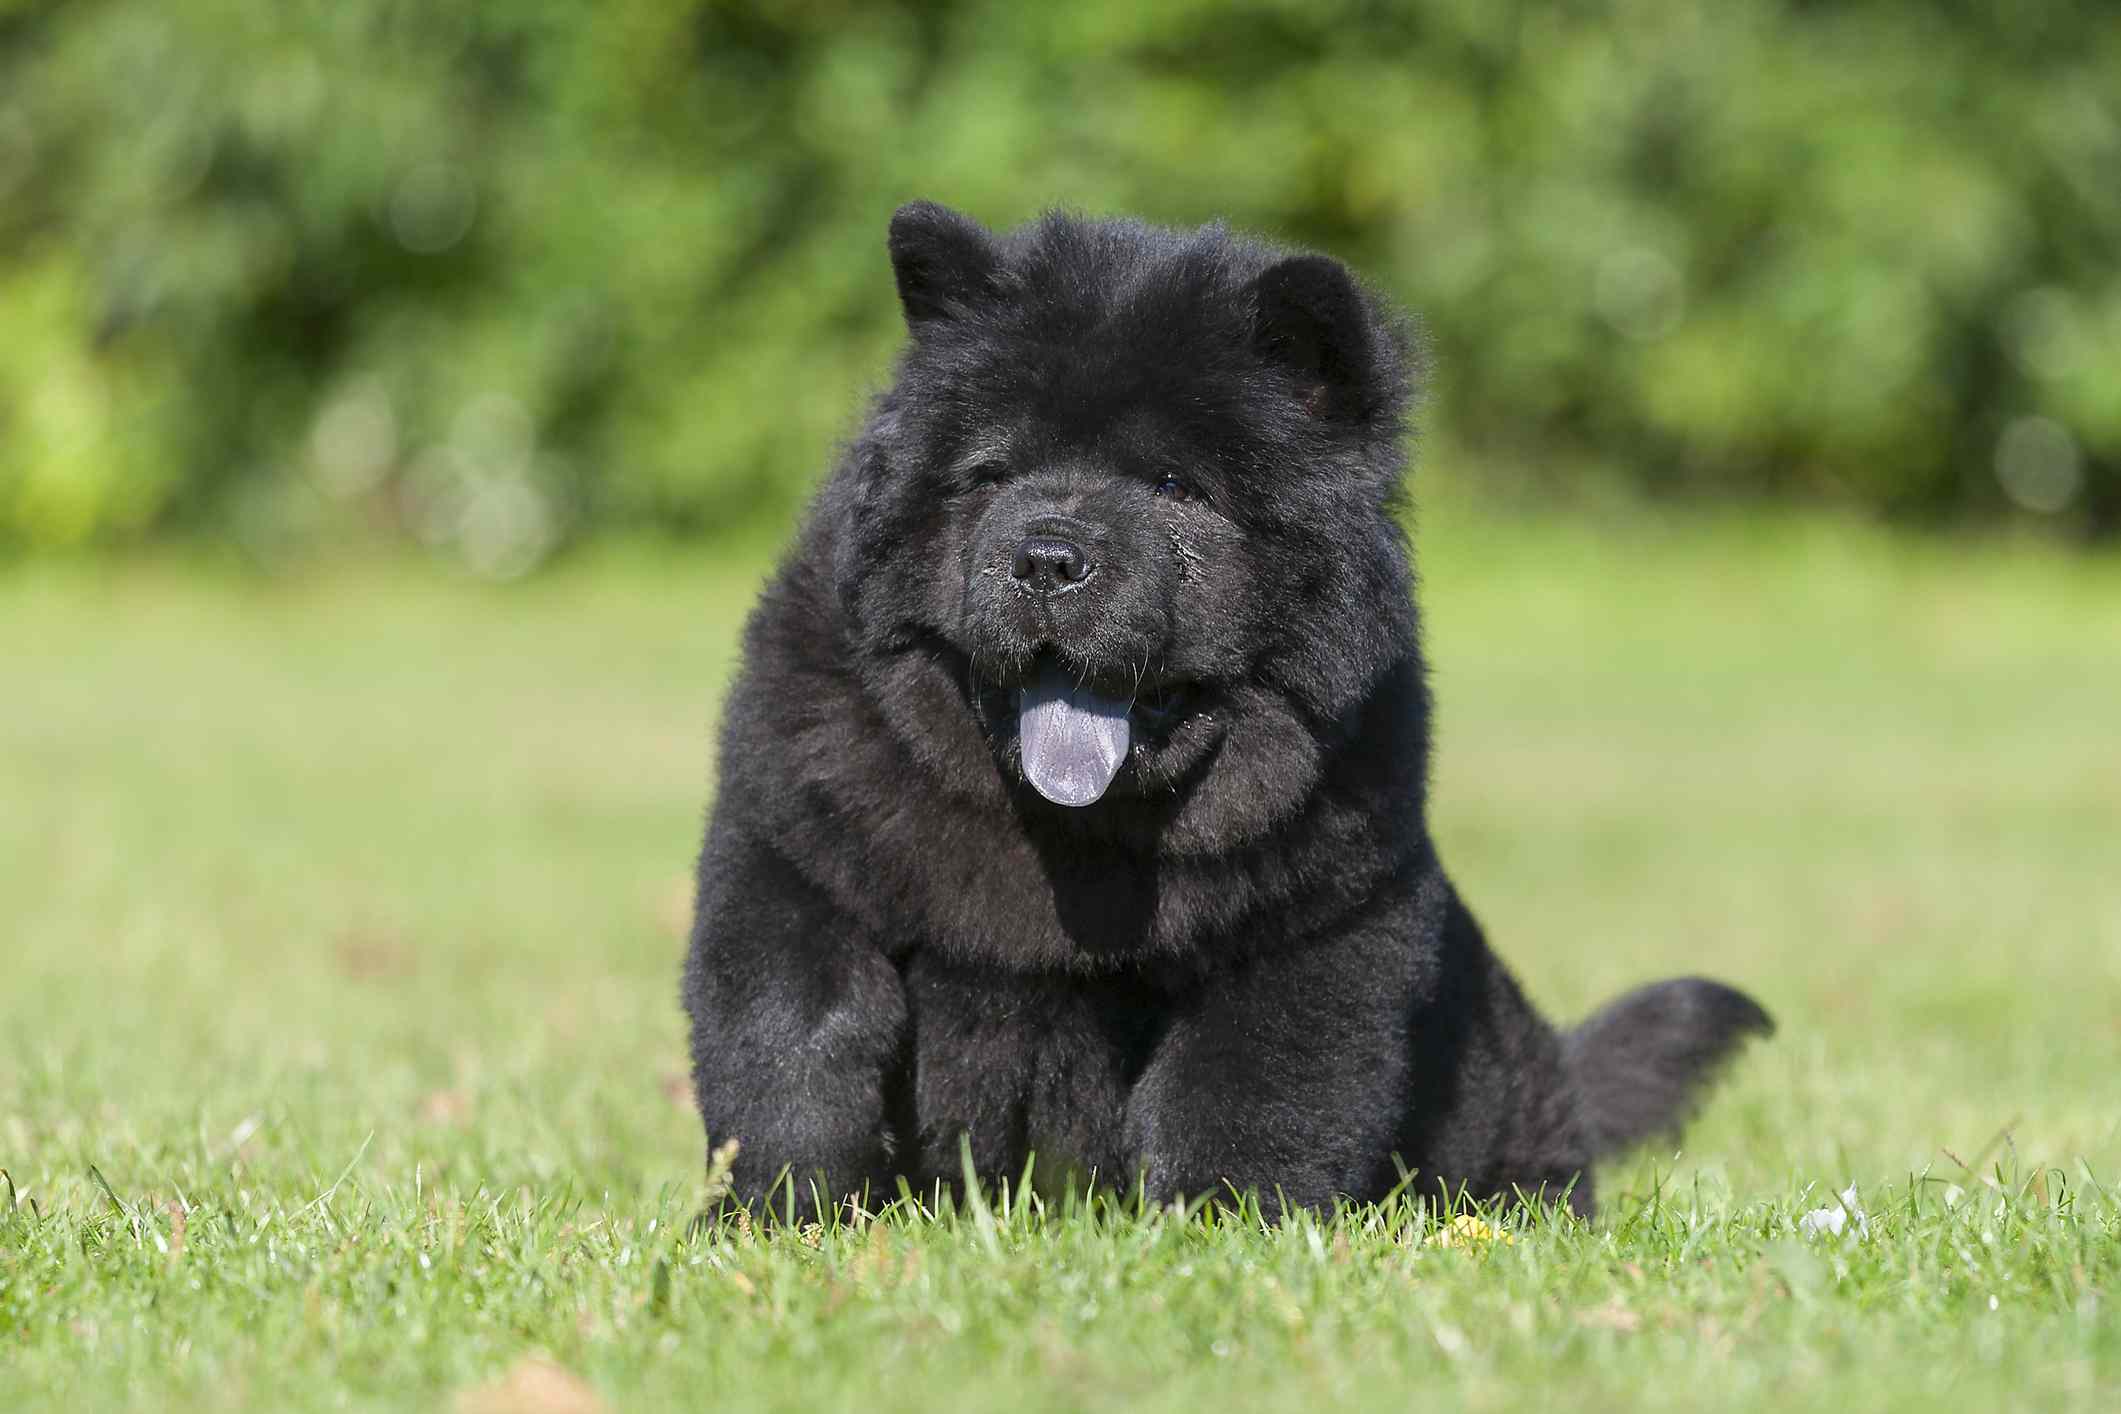 A black Chow Chow sitting outdoors.